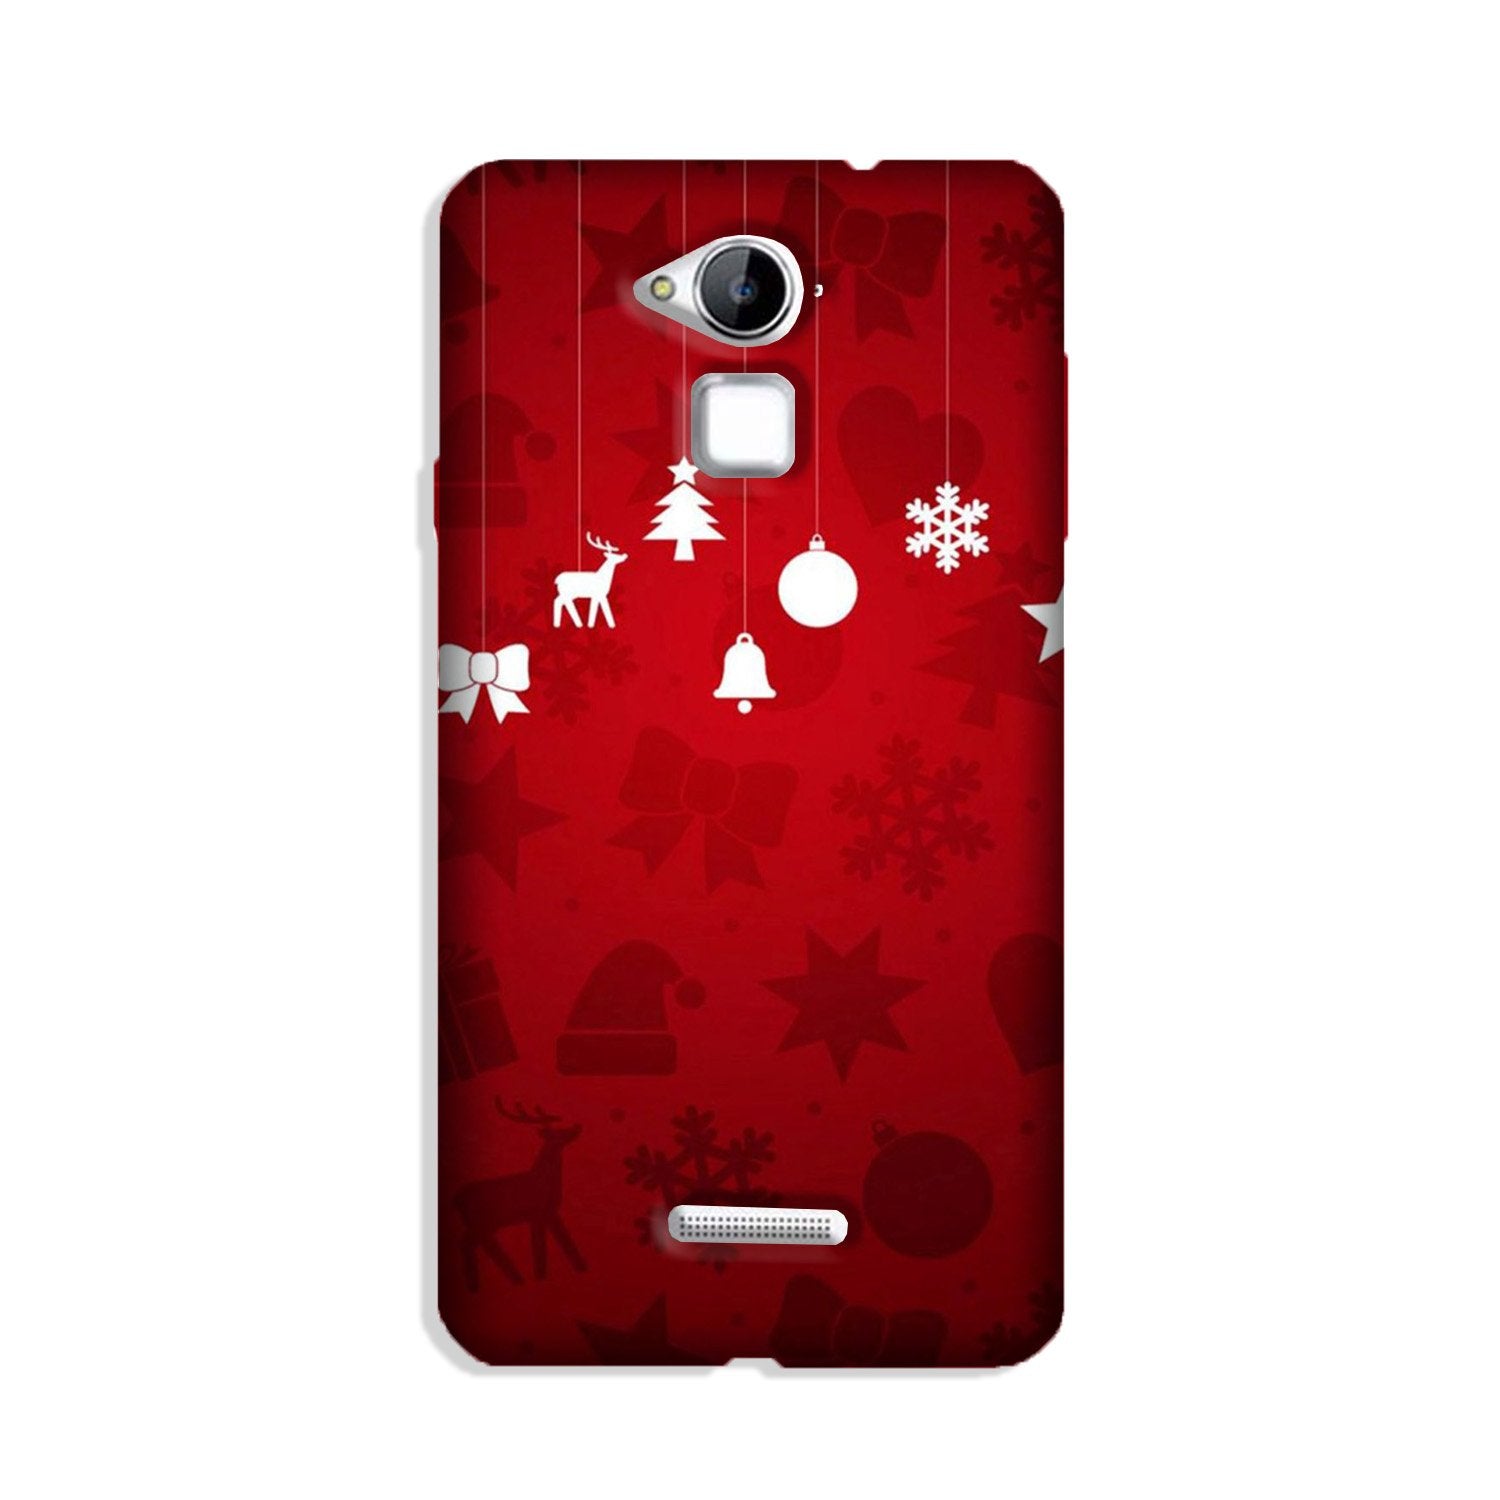 Christmas Case for Coolpad Note 3